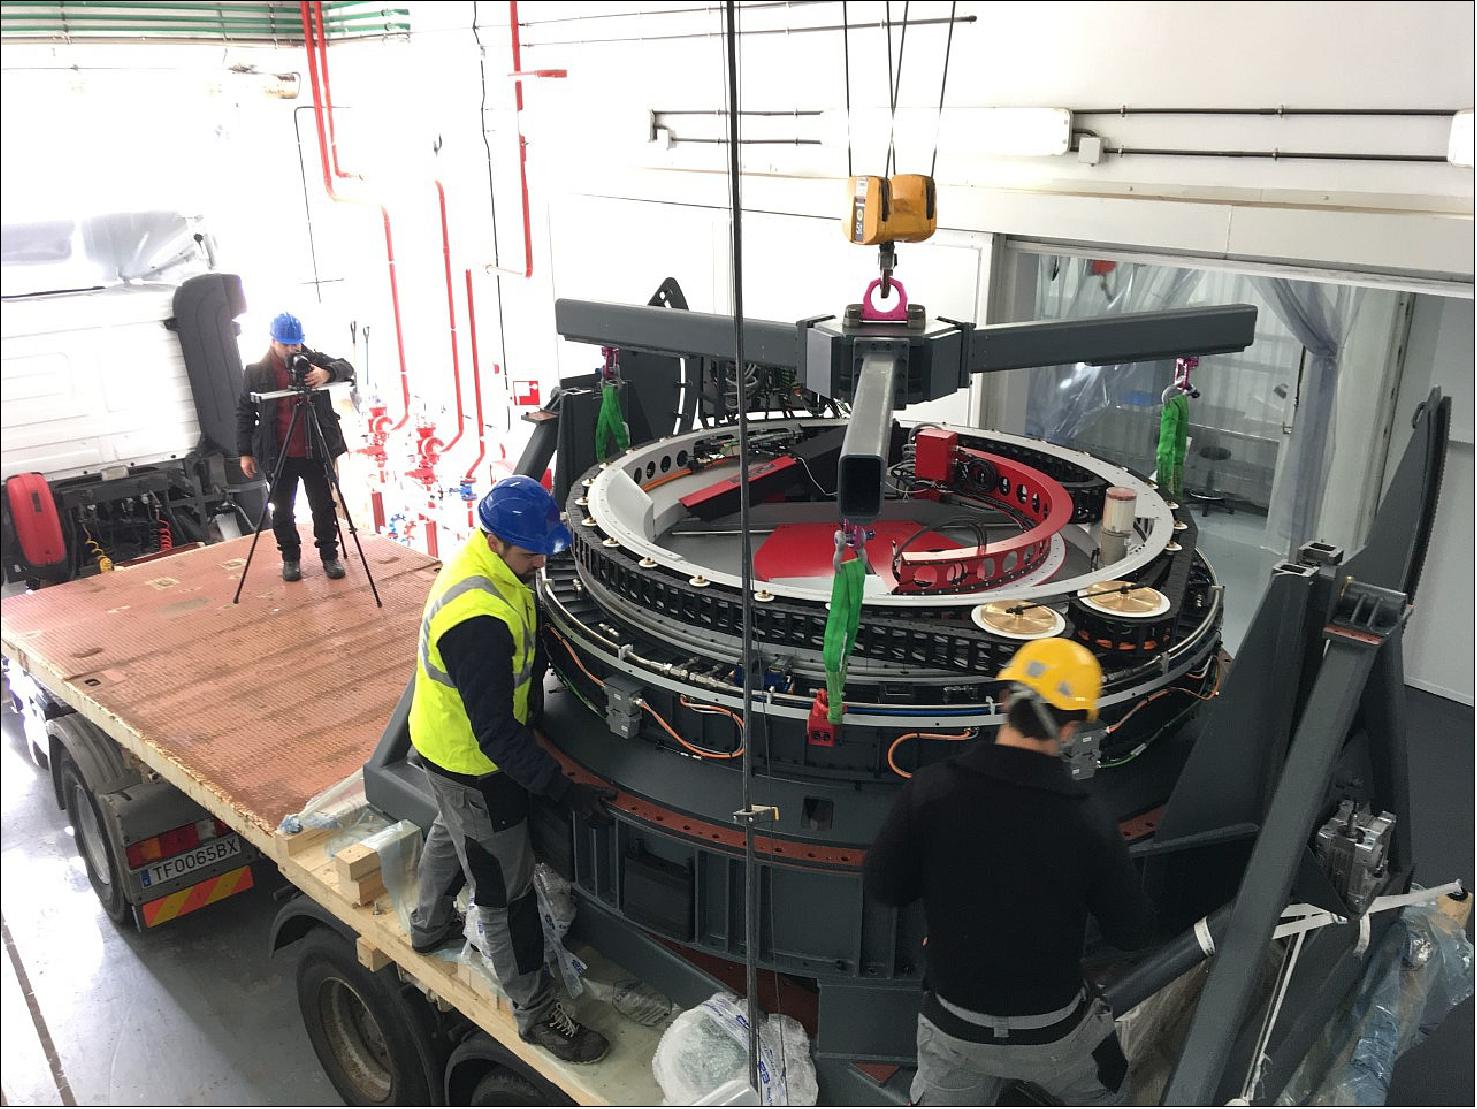 Figure 26: Arrival of Main Cassegrain Focal Station at GTC in January 2020. (image credit: IAC)